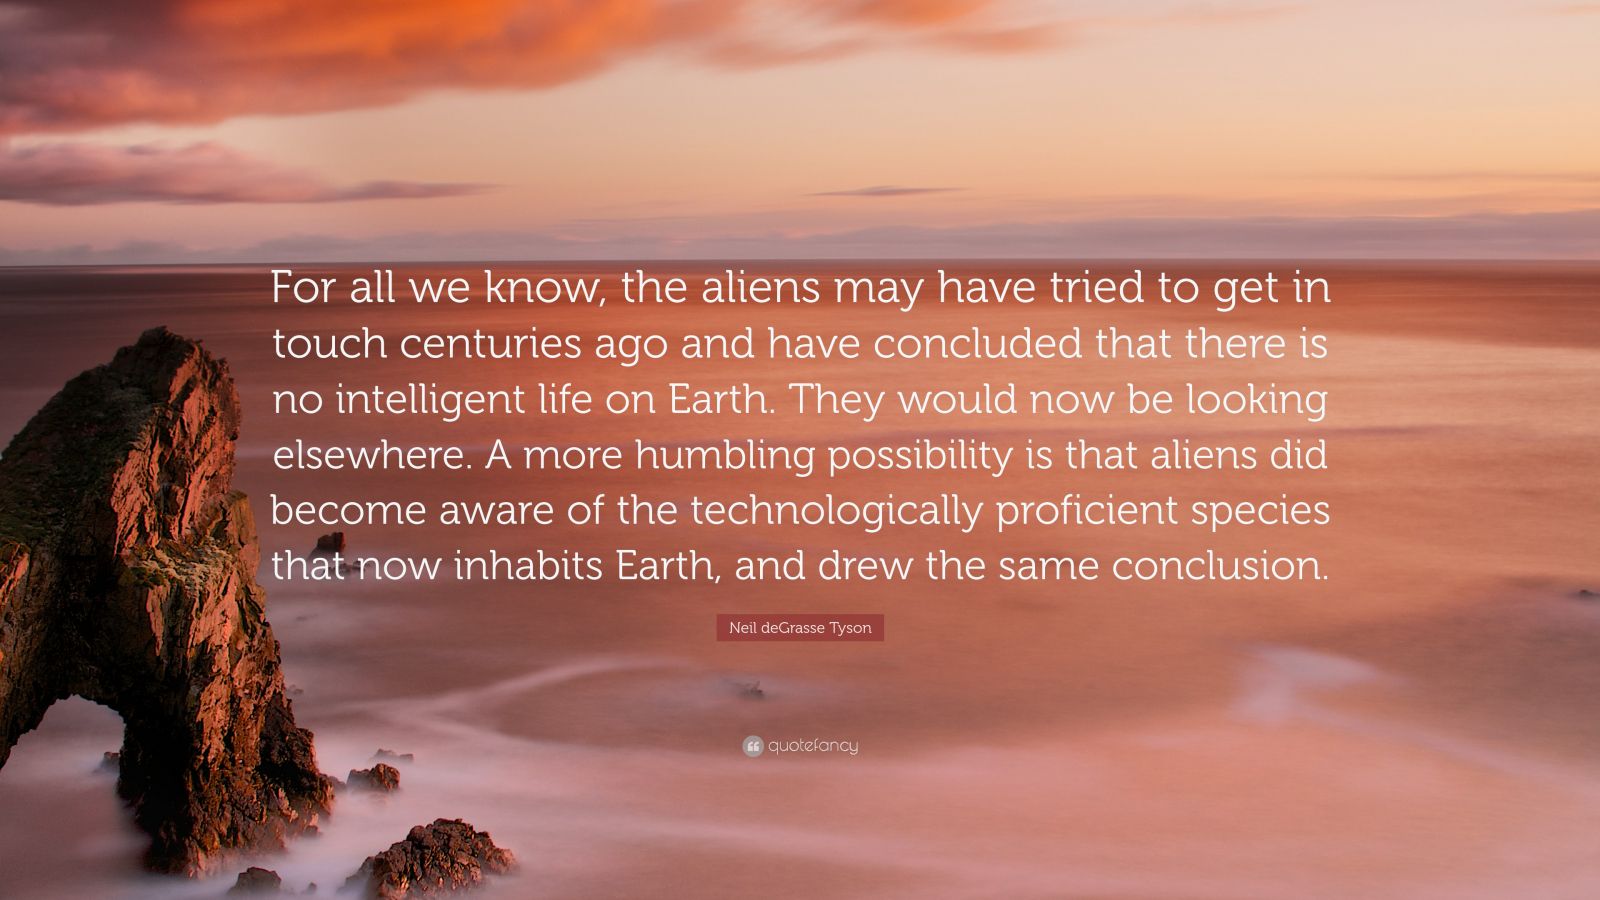 Neil deGrasse Tyson Quote: “For all we know, the aliens may have tried ...